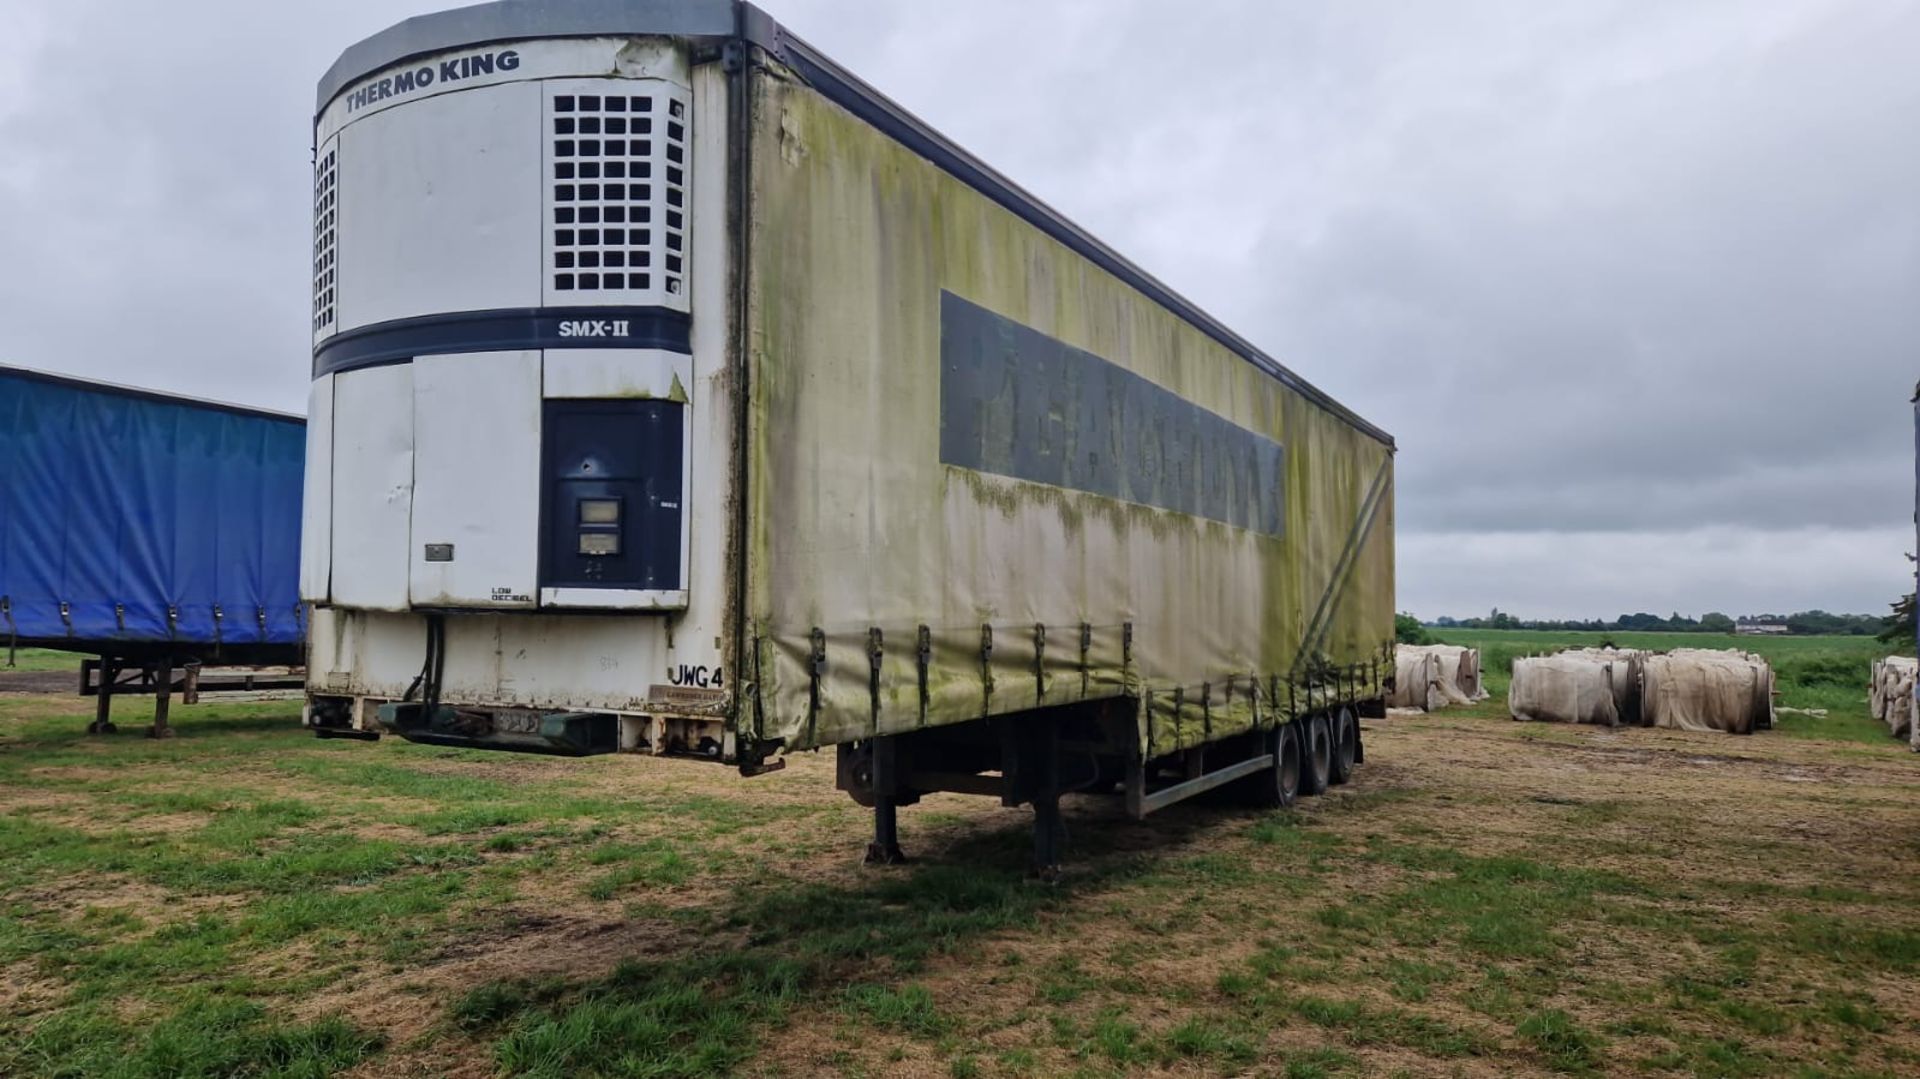 Lawrence David (JWG 4) step frame, tri axle on air suspension, curtain sided trailer